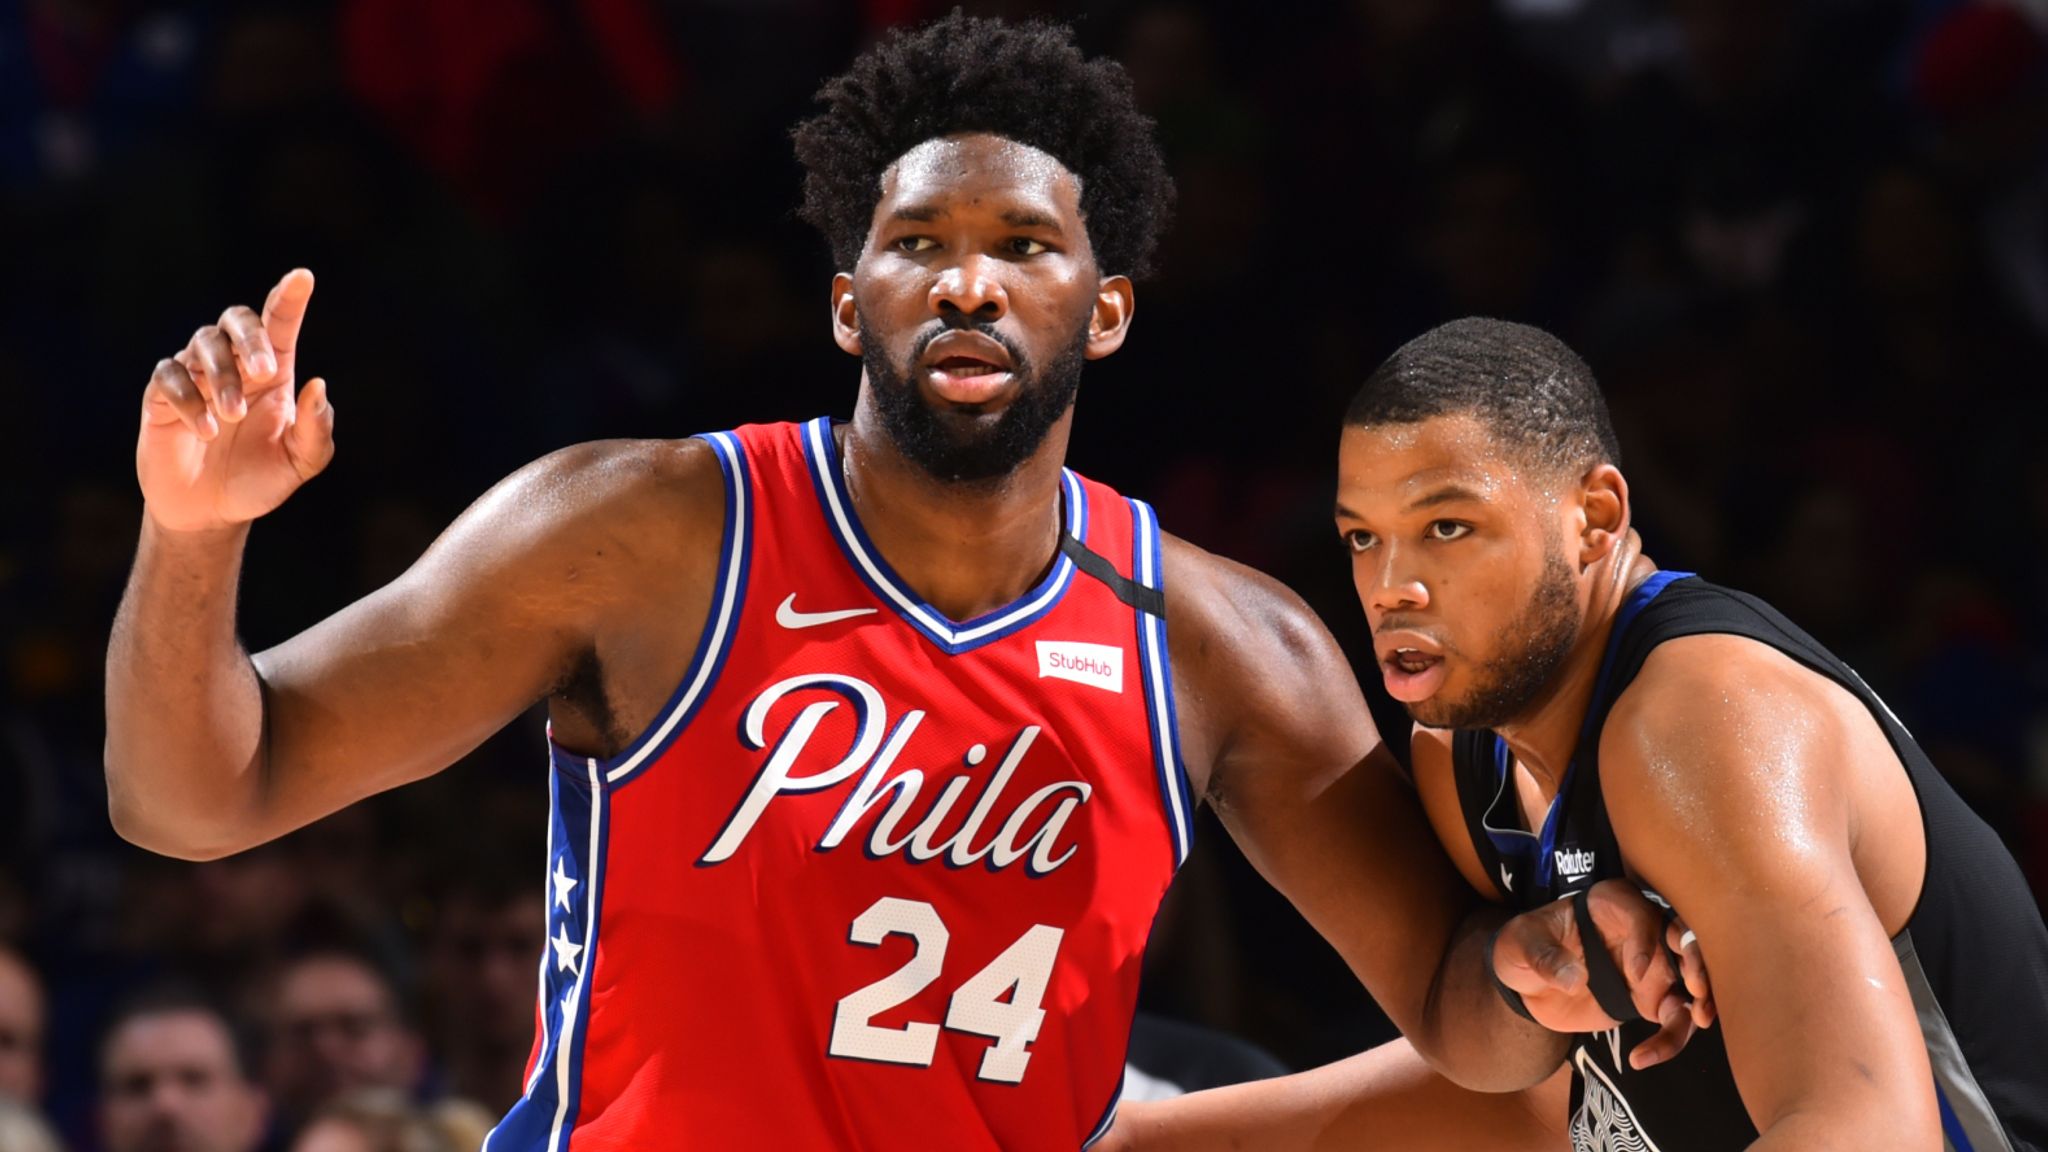 Joel Embiid wears No. 24 and scores 24 points as 76ers honor late Lakers  legend Kobe Bryant 